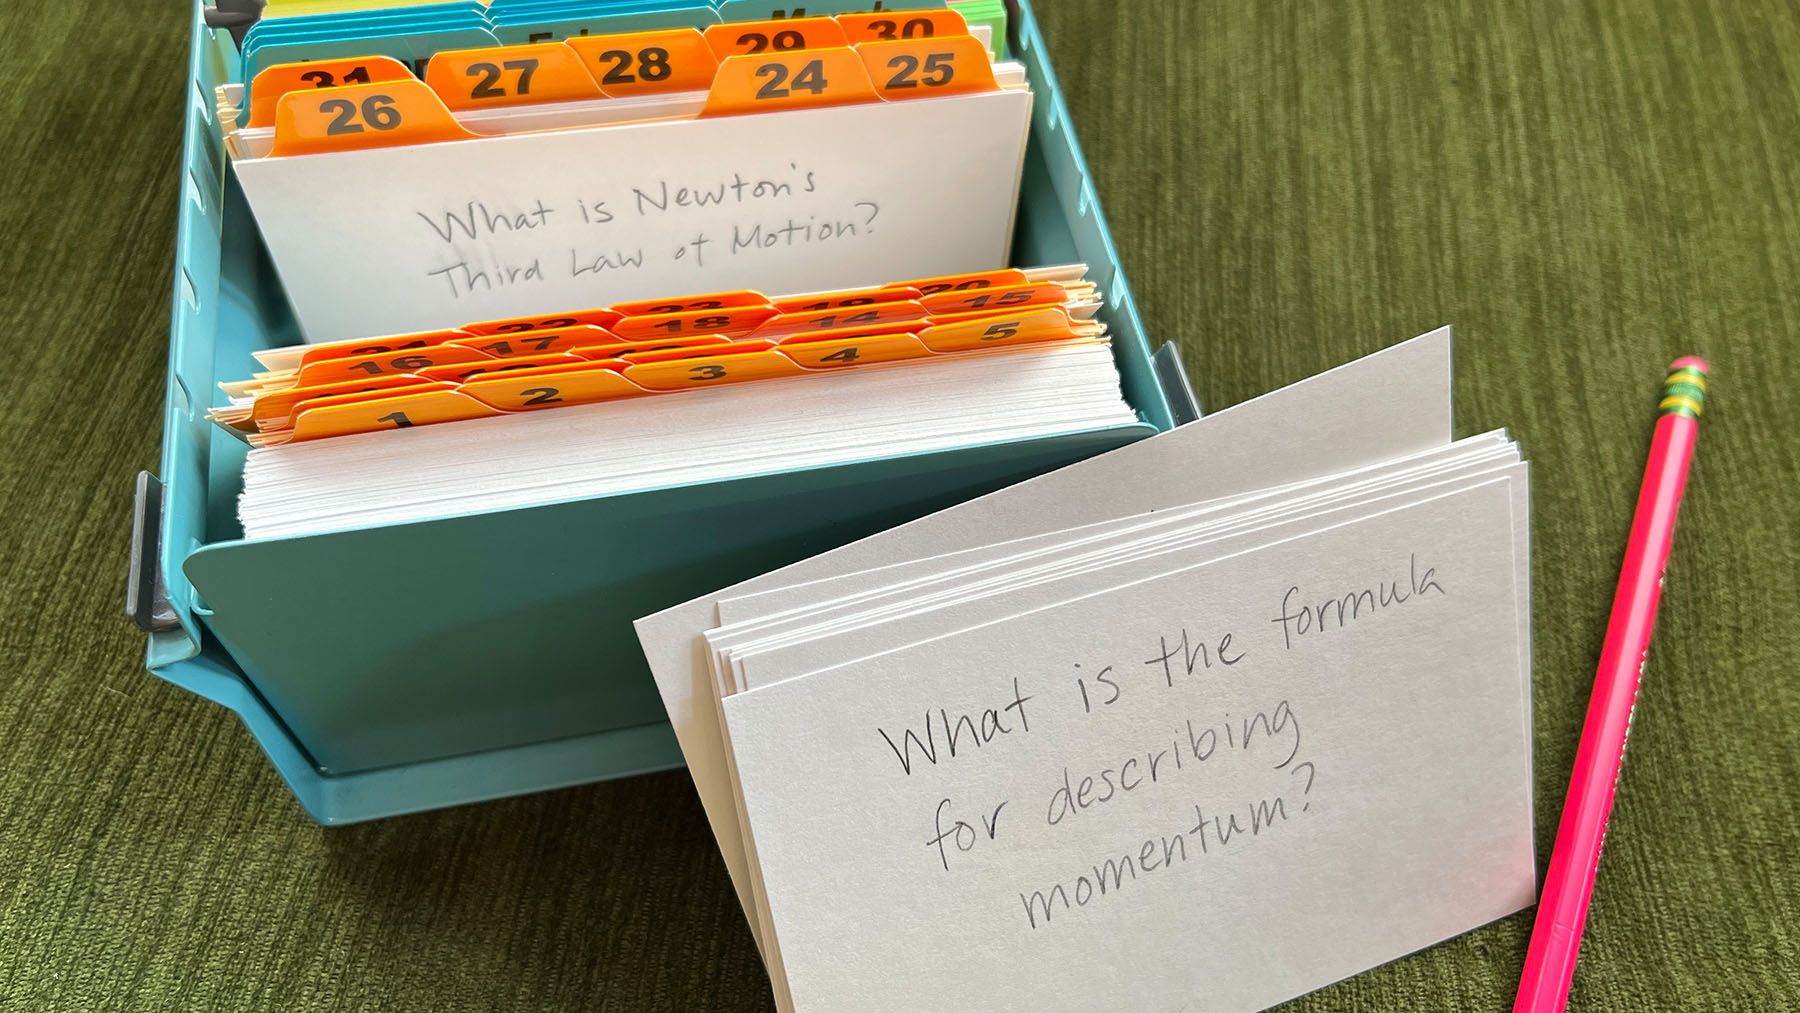 A box holding index cards separated by numbered dividers. A visible card says "What is the formula for describing momentum?"